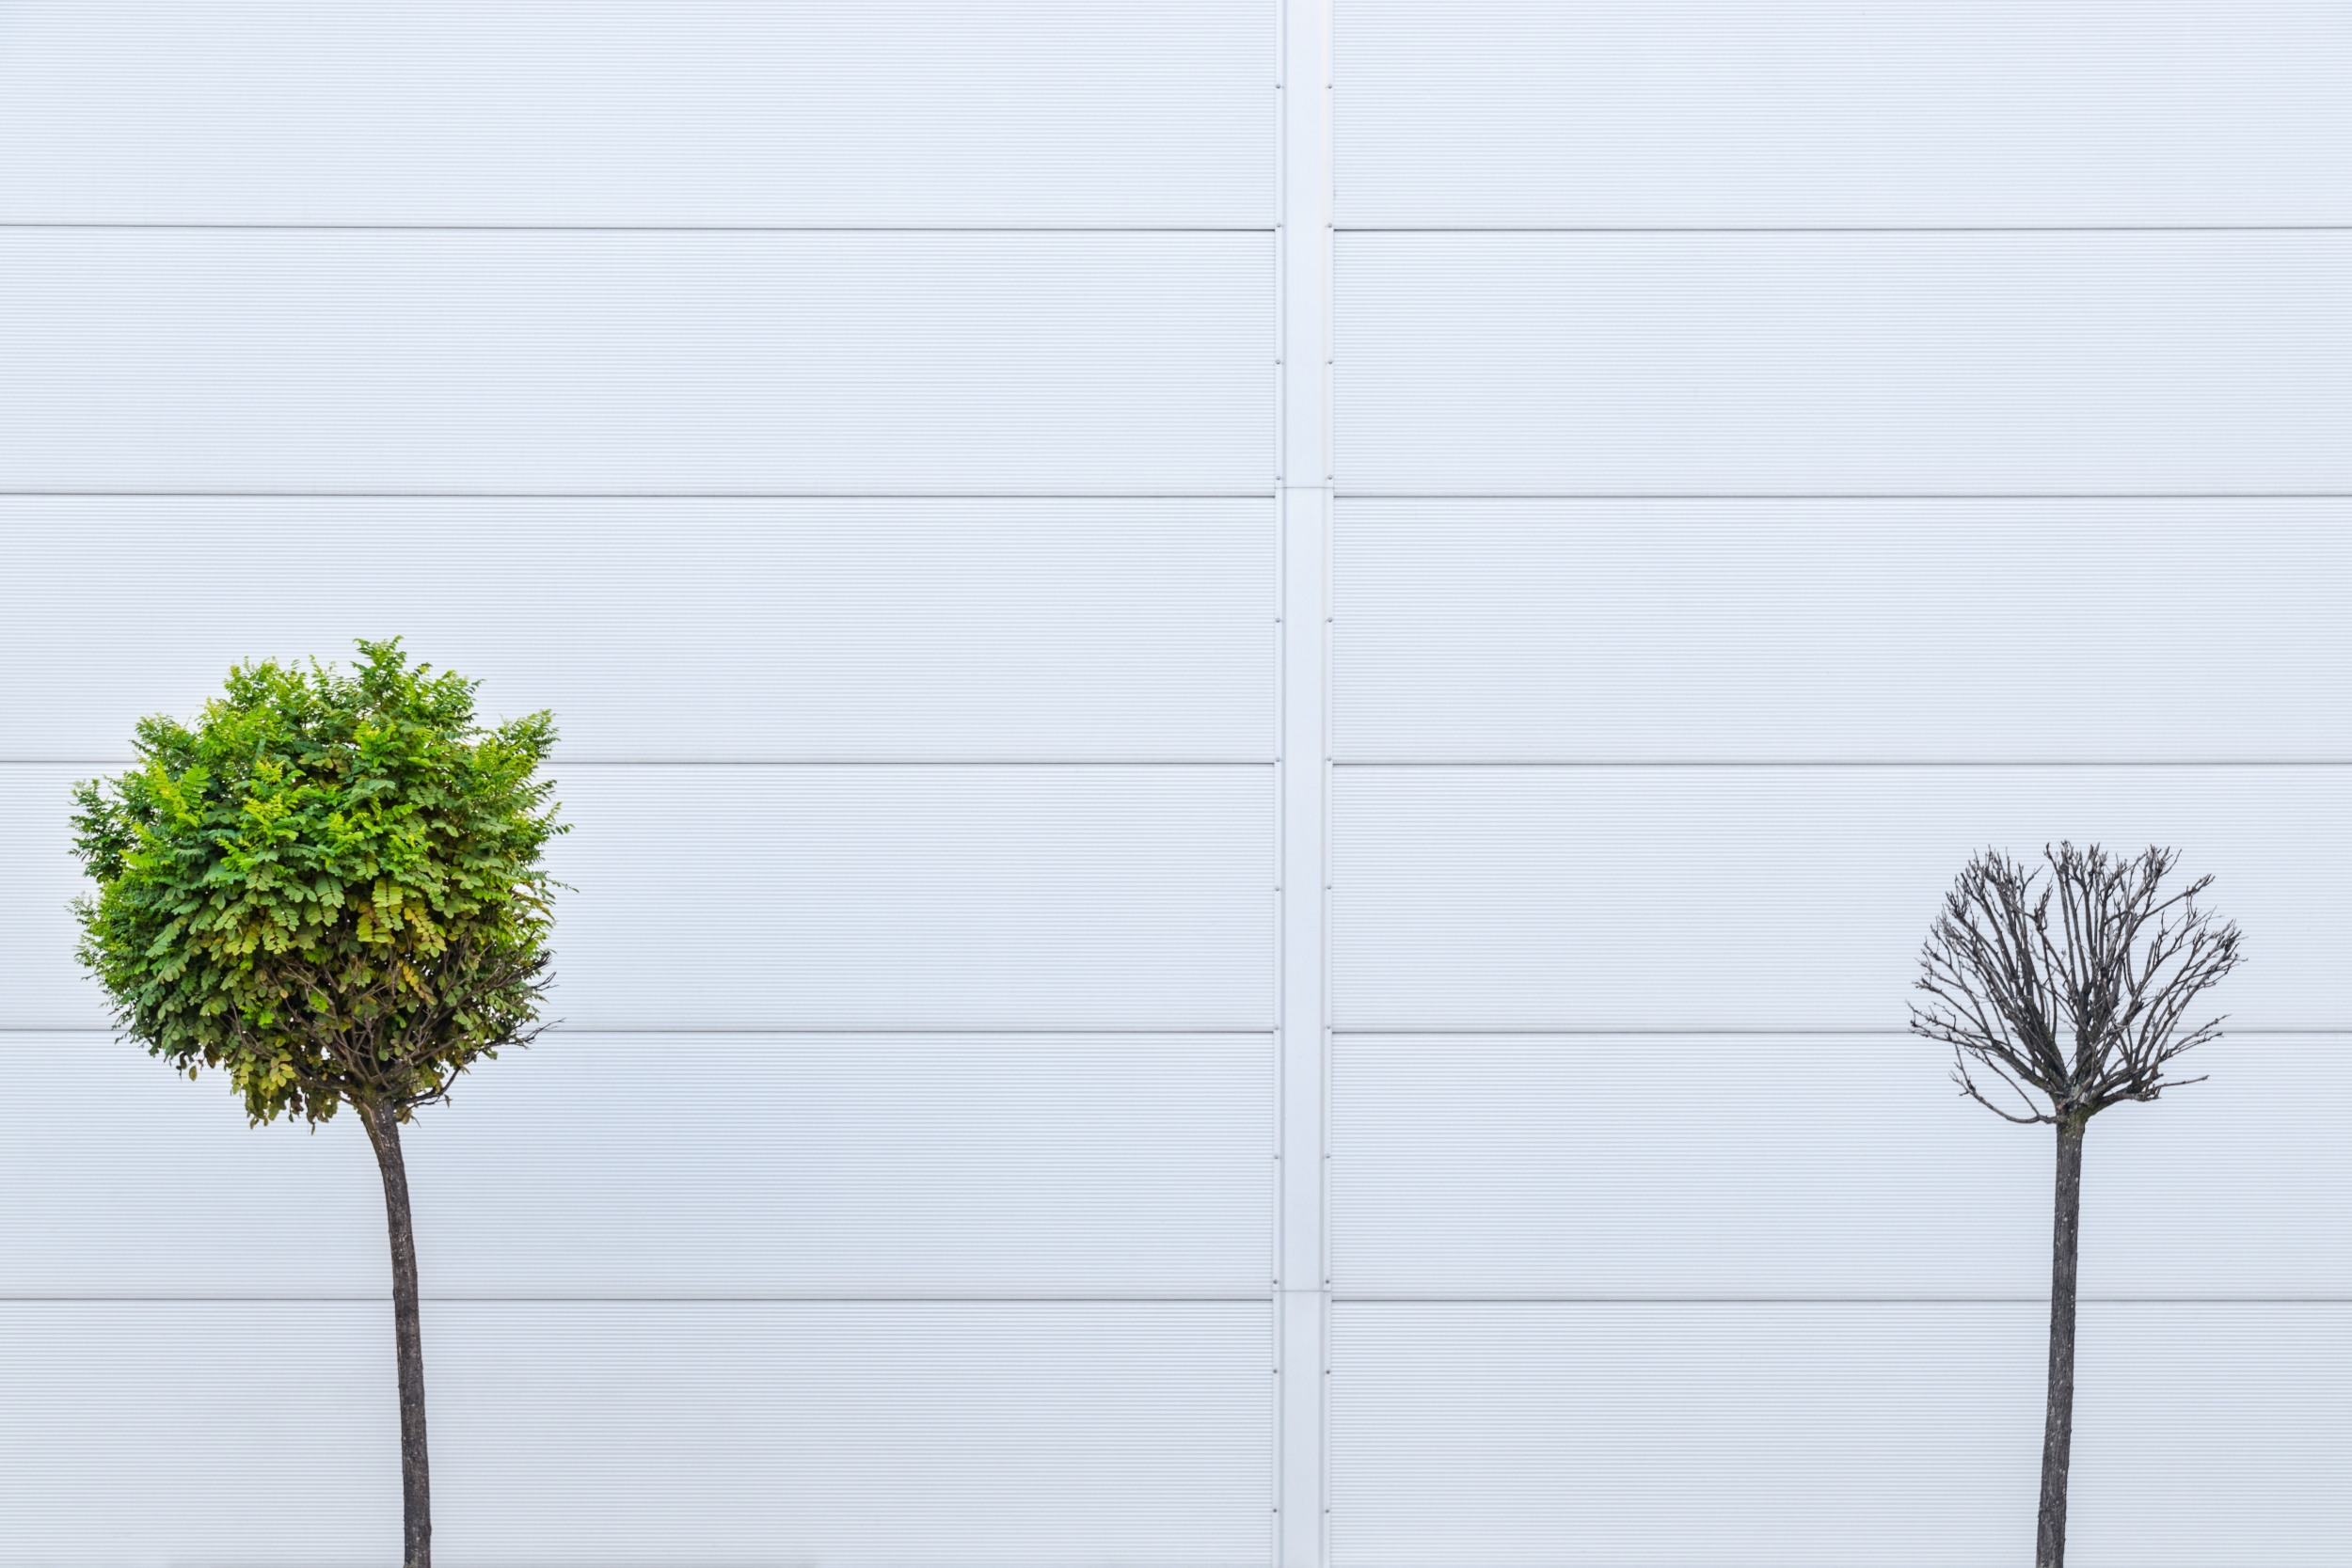 Two trees against a white wall. One tree is green and thriving, the other is bare and dying